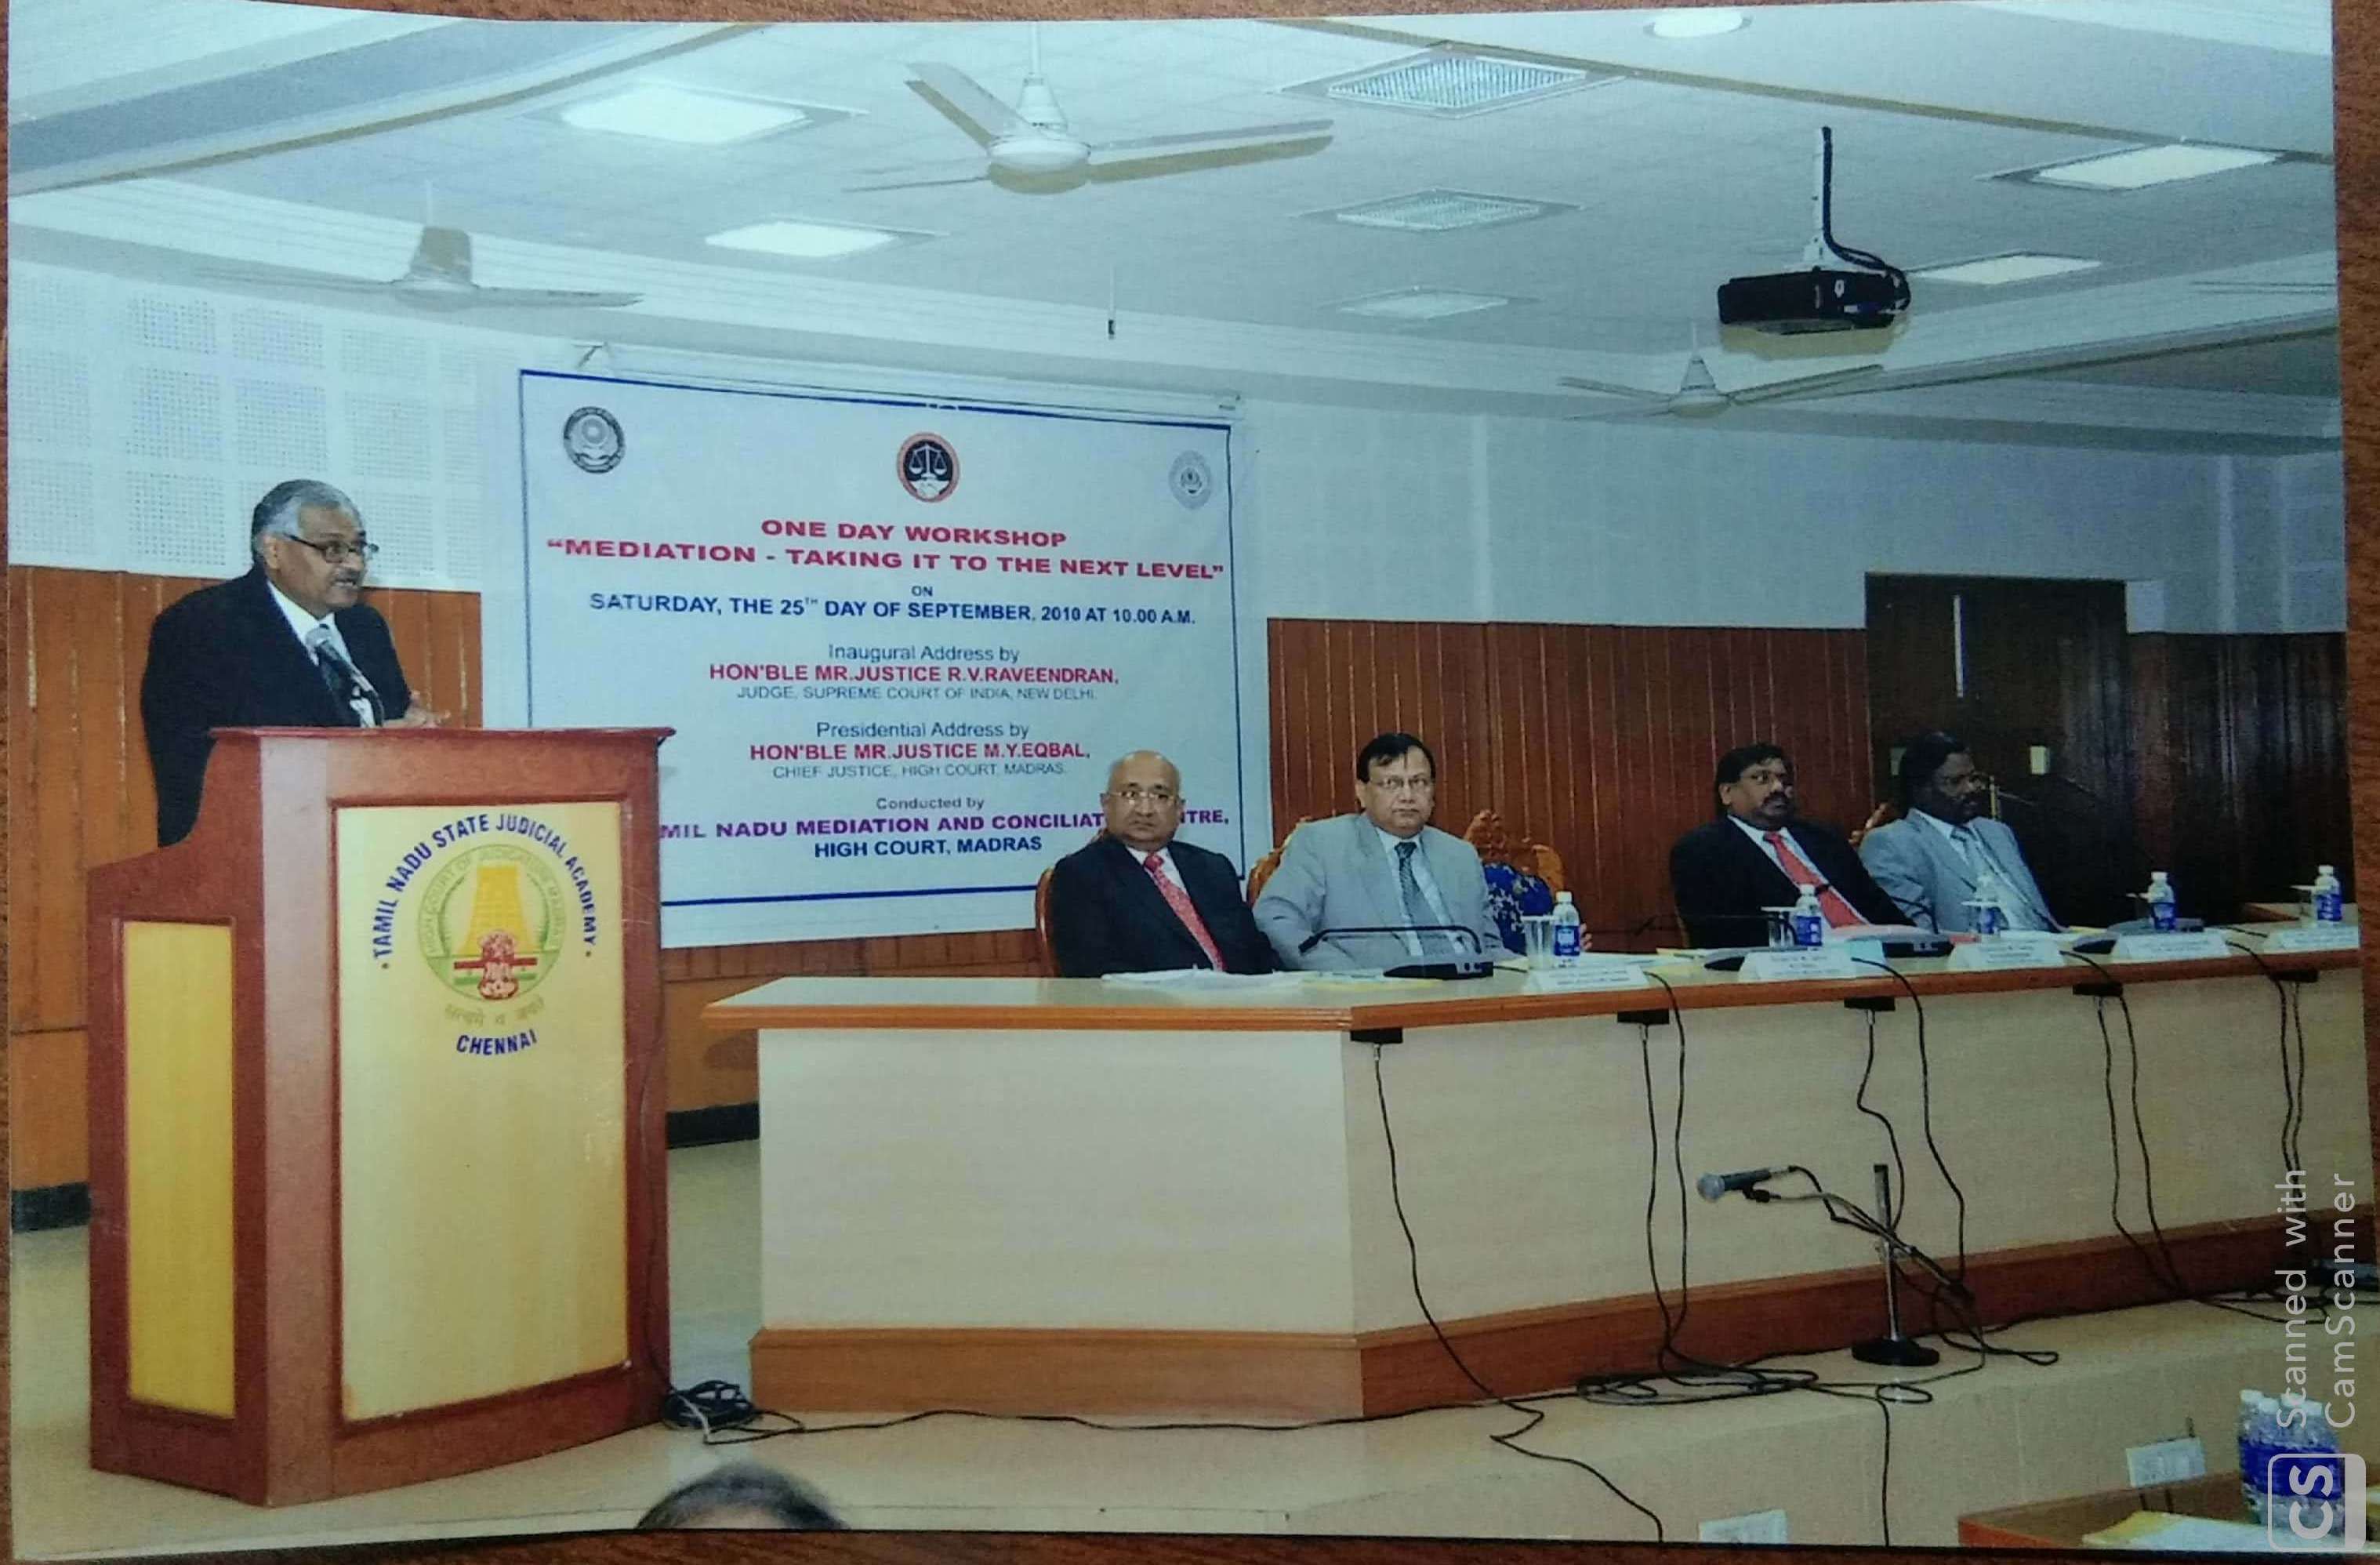 Workshop – “ Mediation – Taking it to the next level” presided over by Hon’ble Mr.Justice R.V.Raveendran, former Judge, Supreme Court of India and Chairman of the Mediation and Conciliation Project Committee.